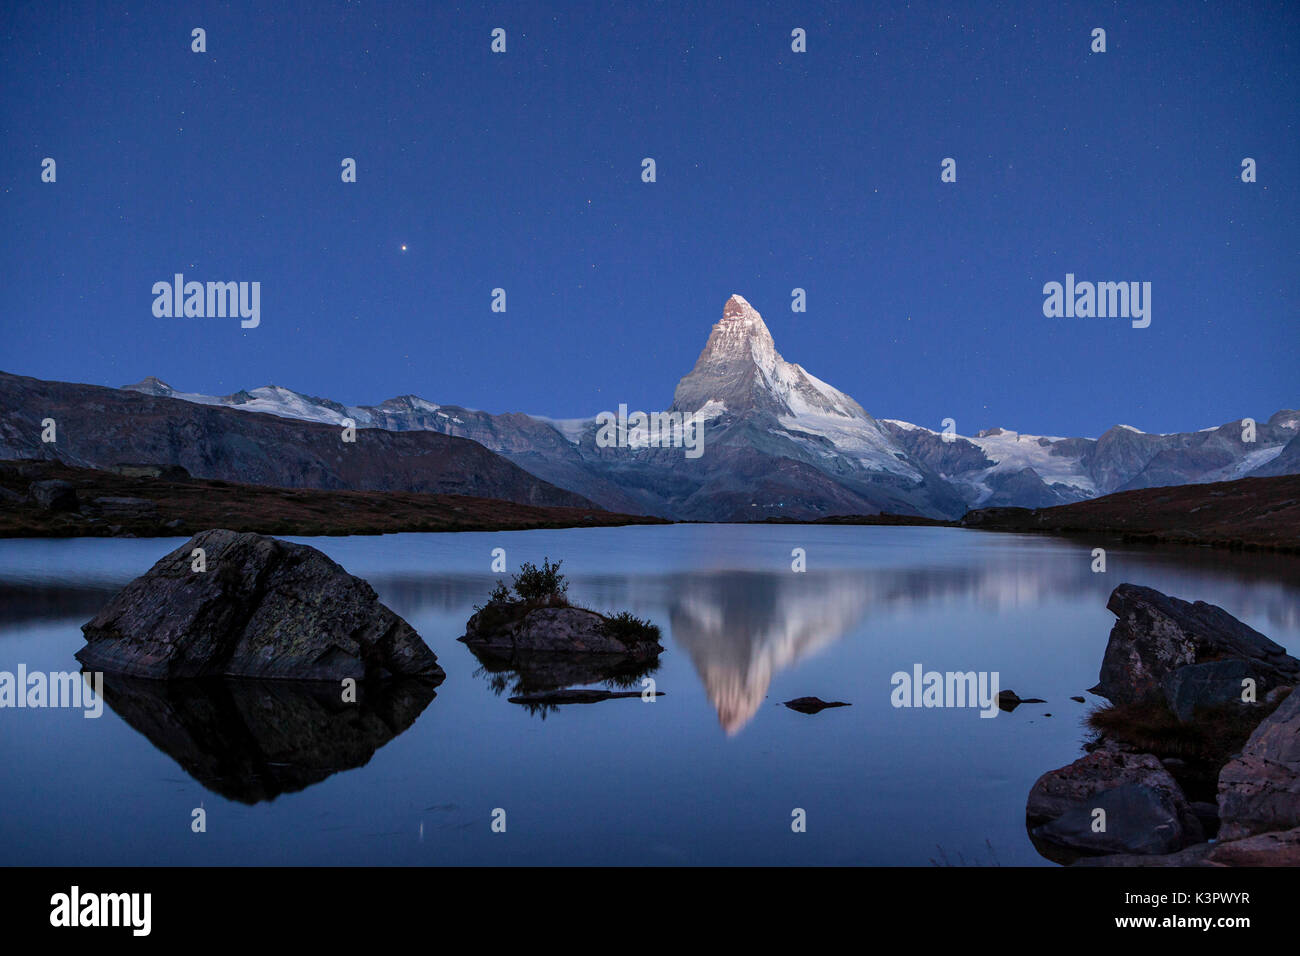 The Matterhorn colossus reflecting in the still water of Lake Stellisee in a clear night. This mirror is just one of the many little lakes spotting the Zermatt heights, famous Swiss resort - Zermatt, Canton of Valais, Switzerland. Europe Stock Photo